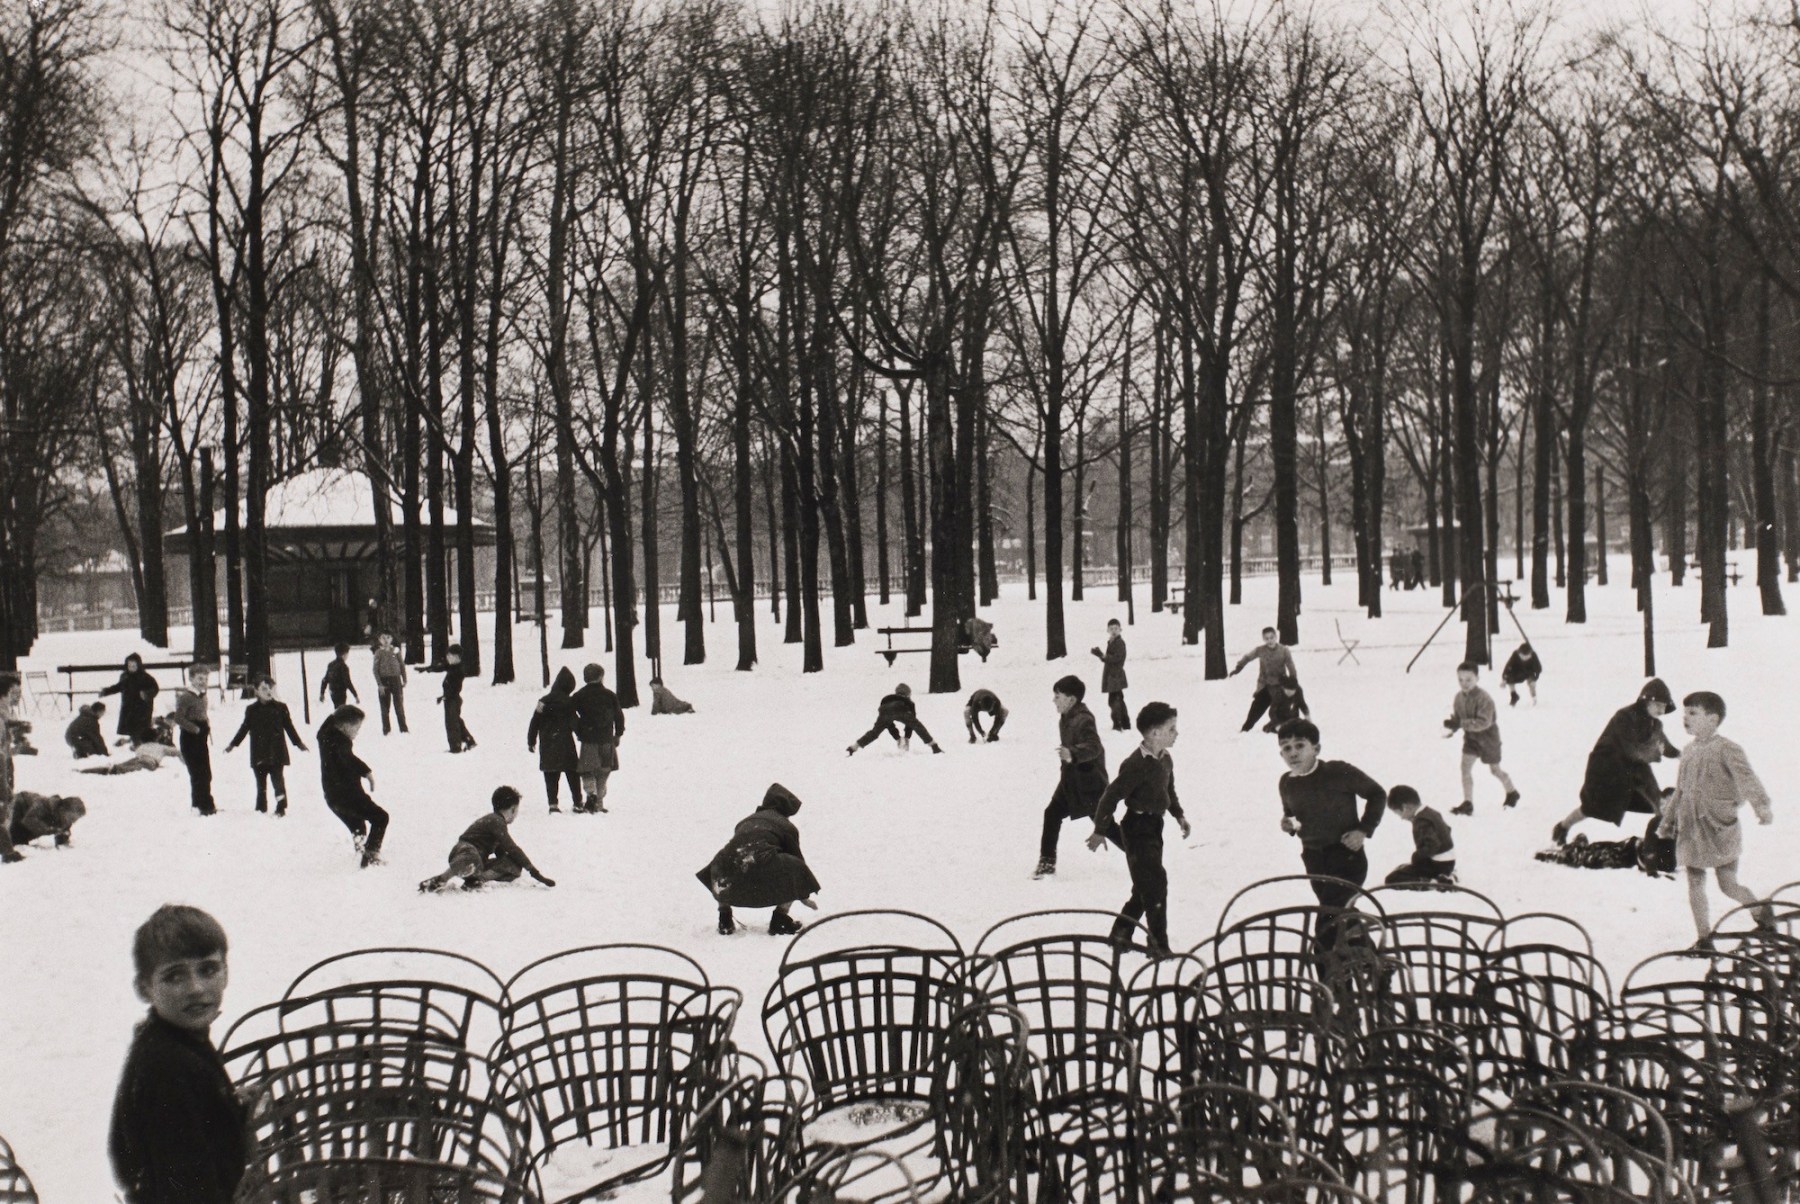 Edouard Boubat (1923-1999)  Enfants dans le Premiere Neige, 1953, printed later  Gelatin silver print  9 1/2h x 14 1/4w in, black and white photography